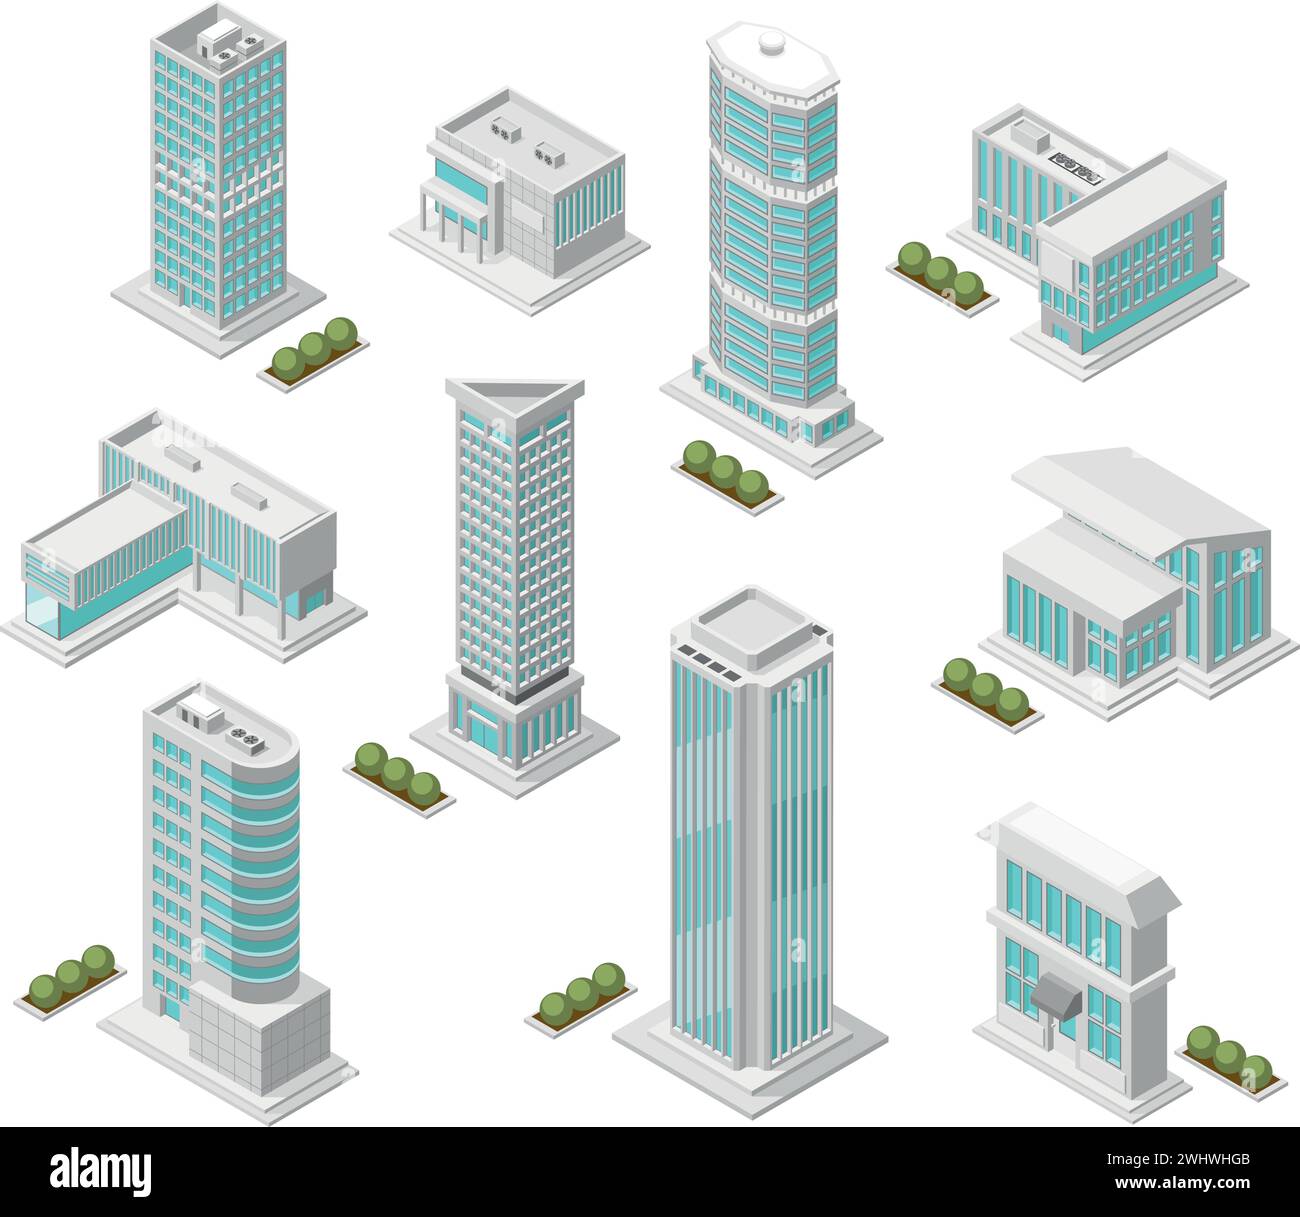 Isometric urban city buildings. Isolated skyscrapers, modern apartment building and private houses. Social and public architecture, flawless vector Stock Vector